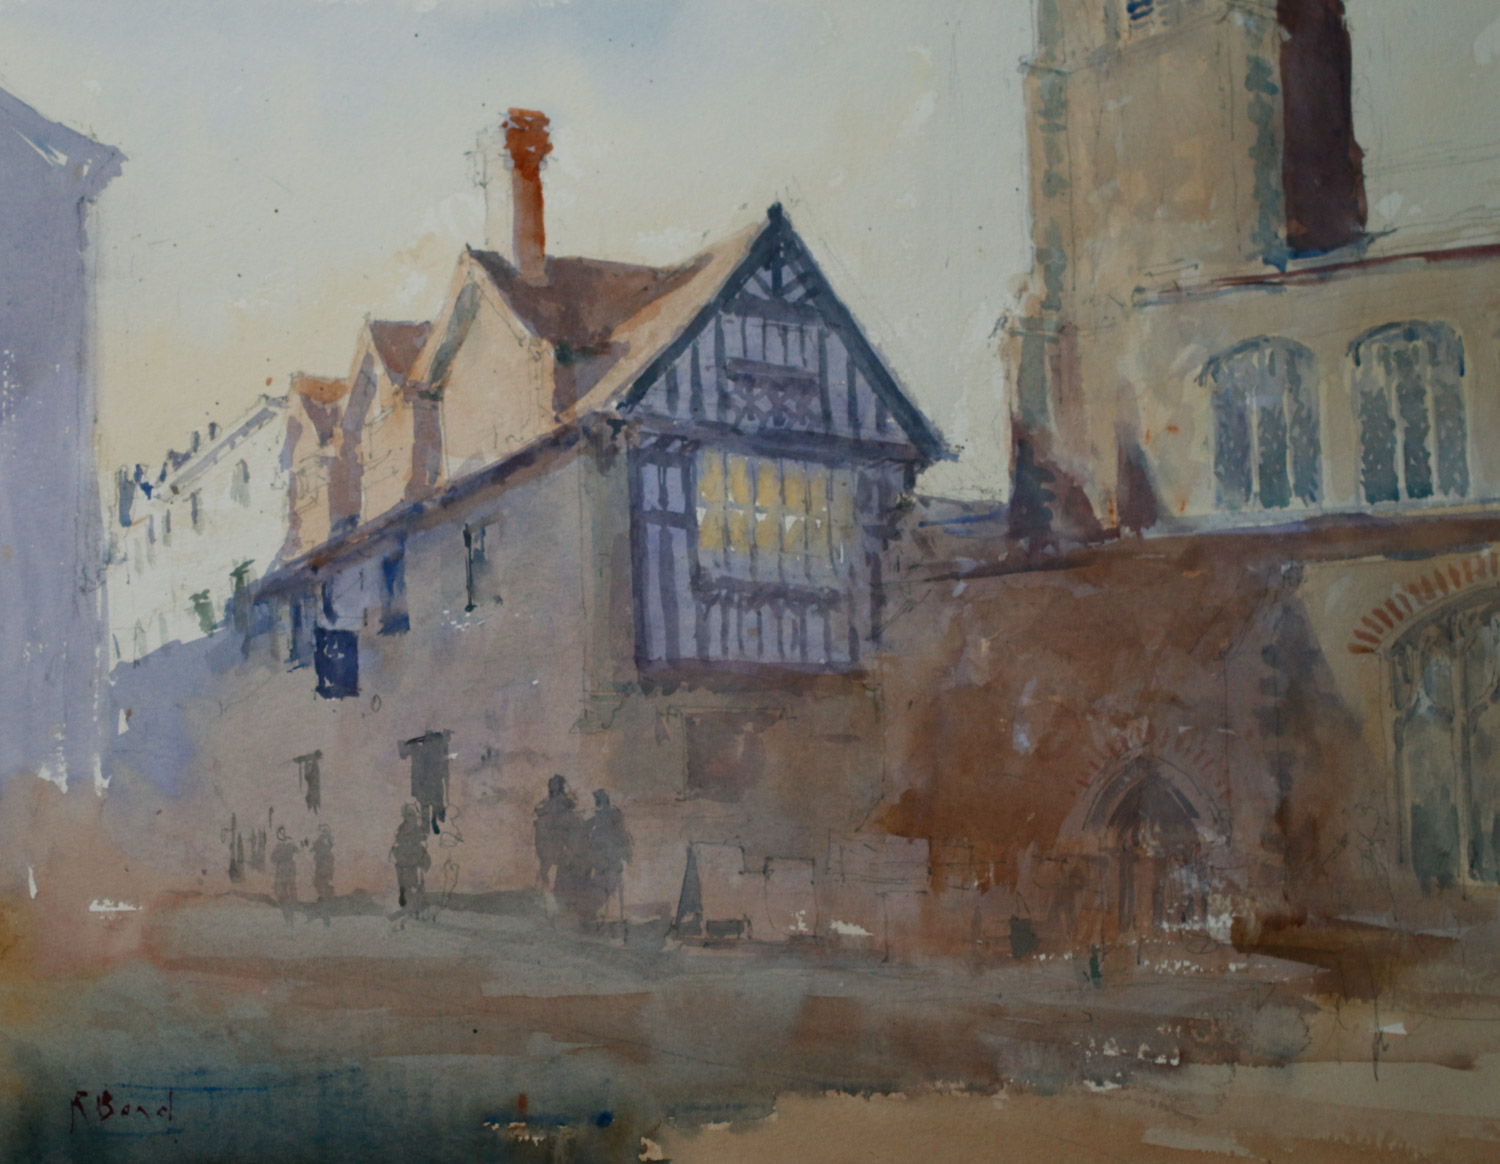 Artist Richard Bond - The Belgian Monk from Pottergate, £525 15x20 Watercolour on Paper at Paint Out Norwich 2015